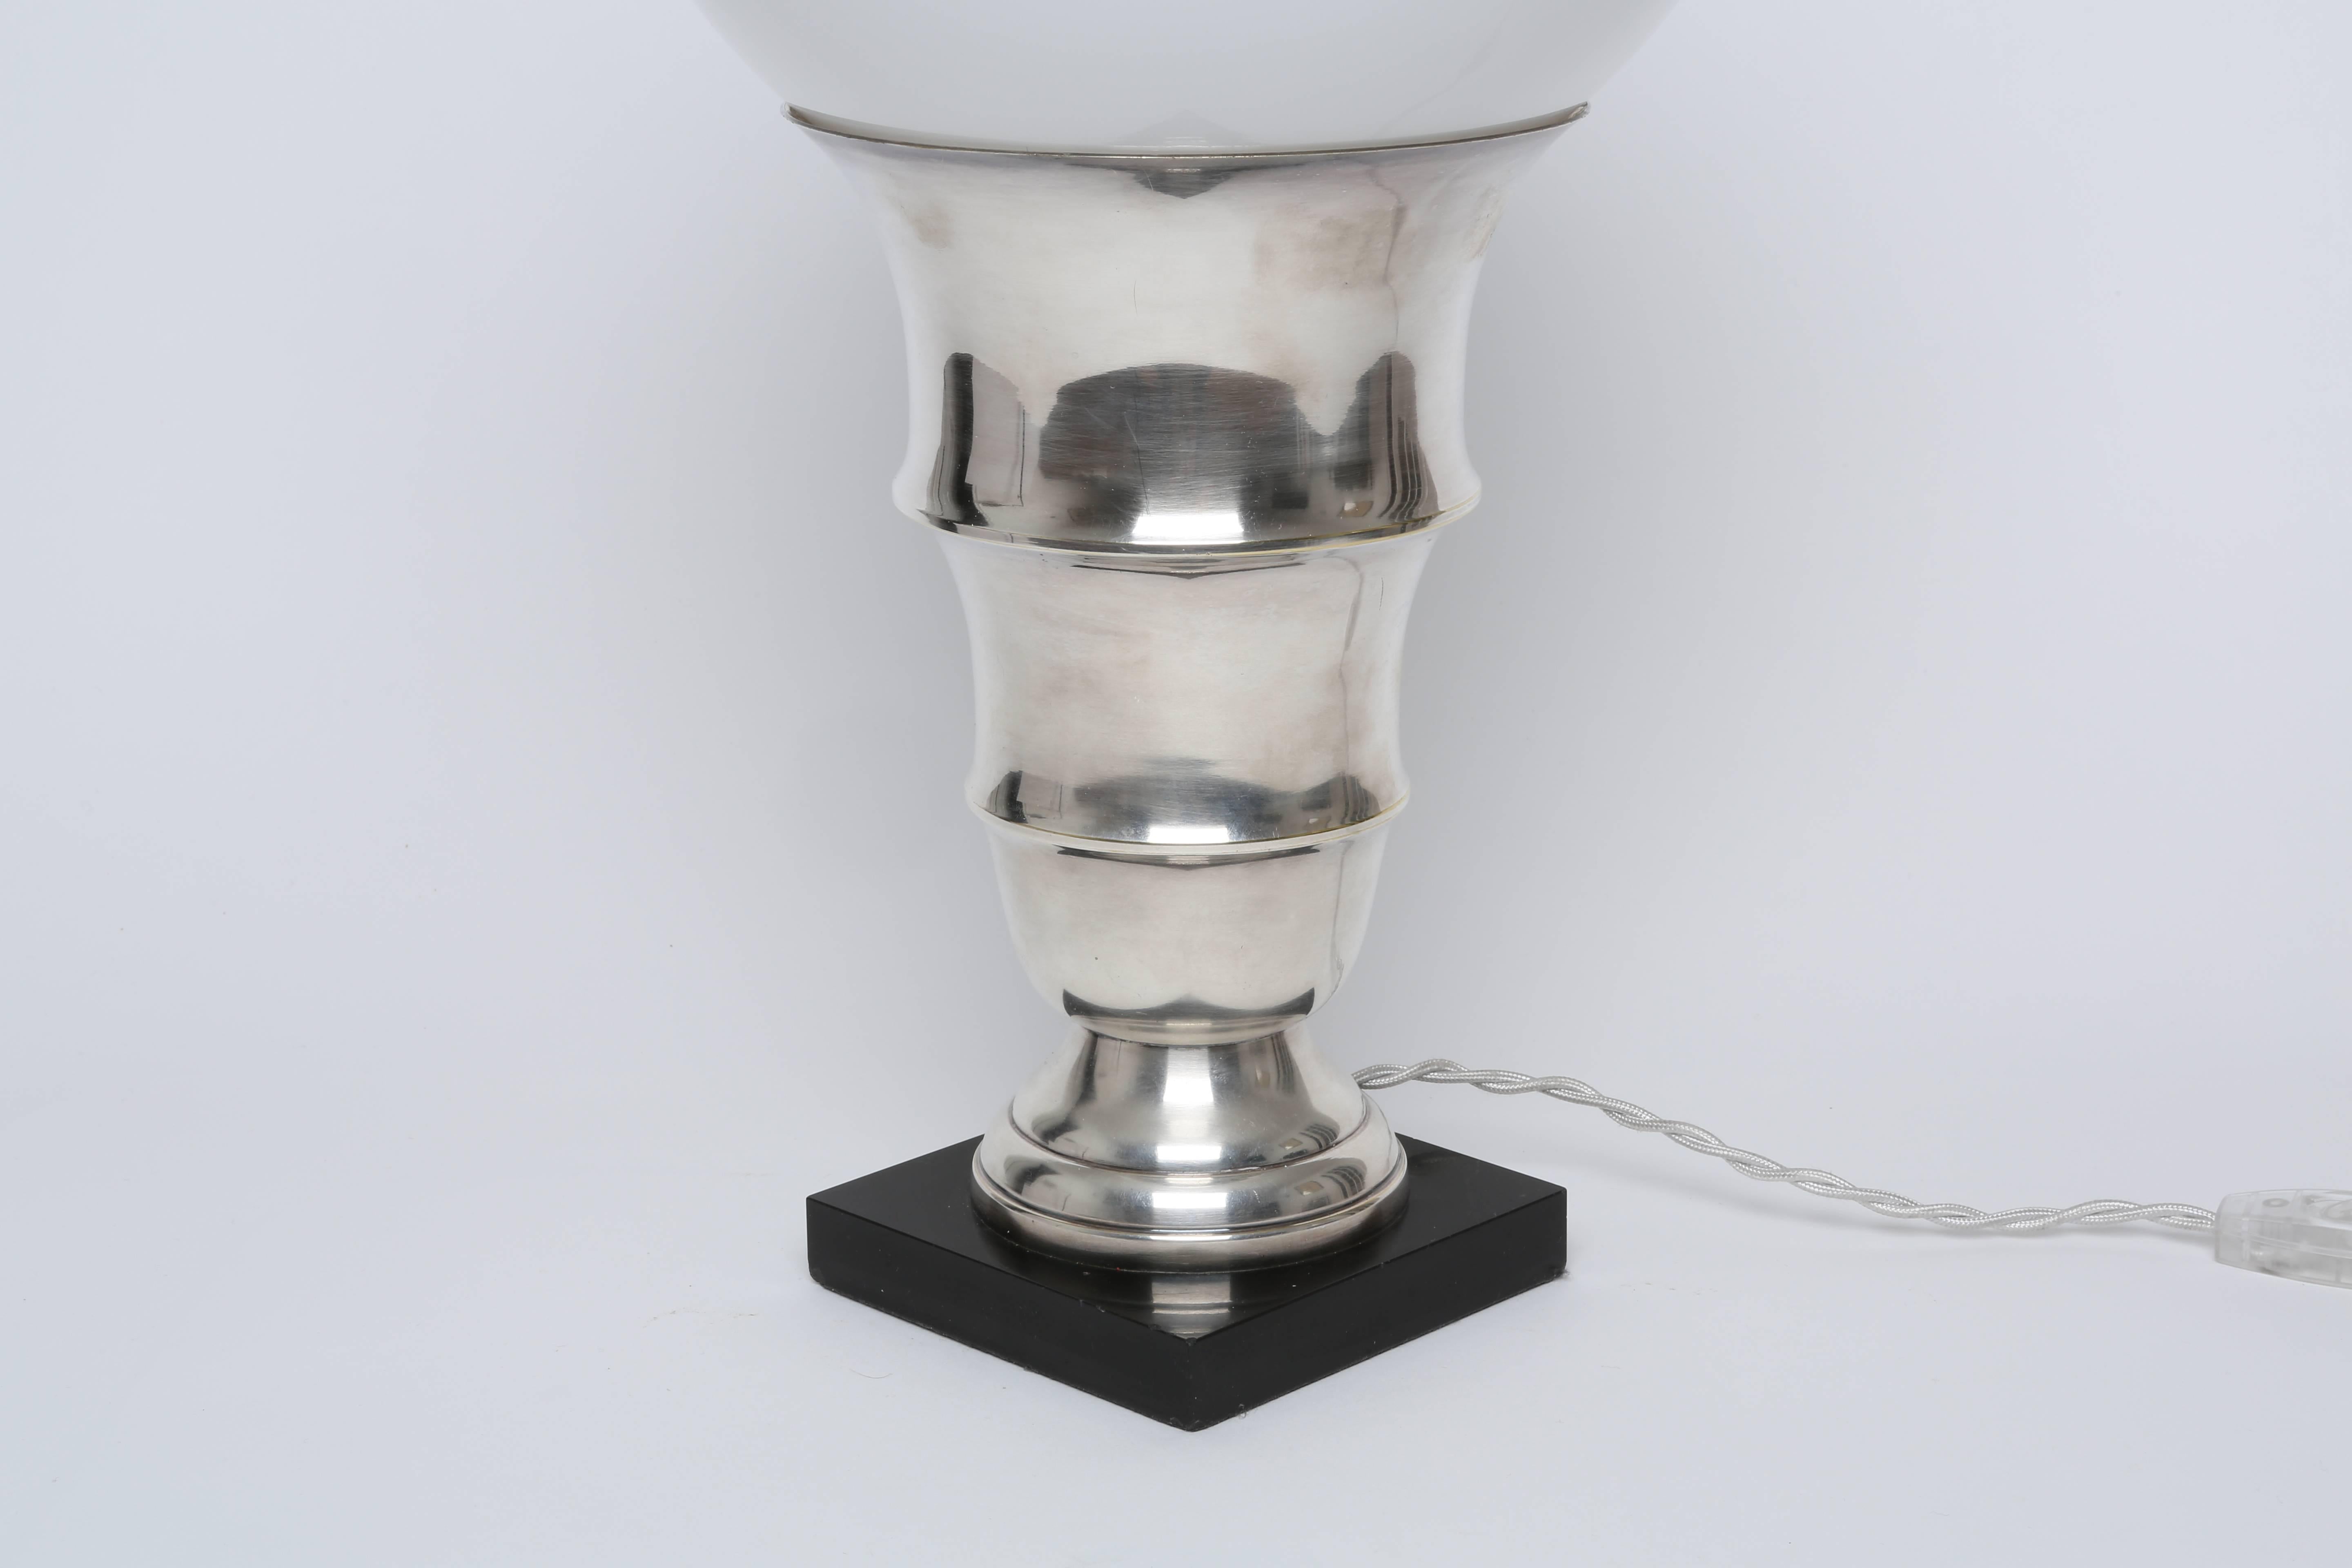 Art Deco table lamp.
Opaline glass, silver plated metal, marble,
1930s-1940s.